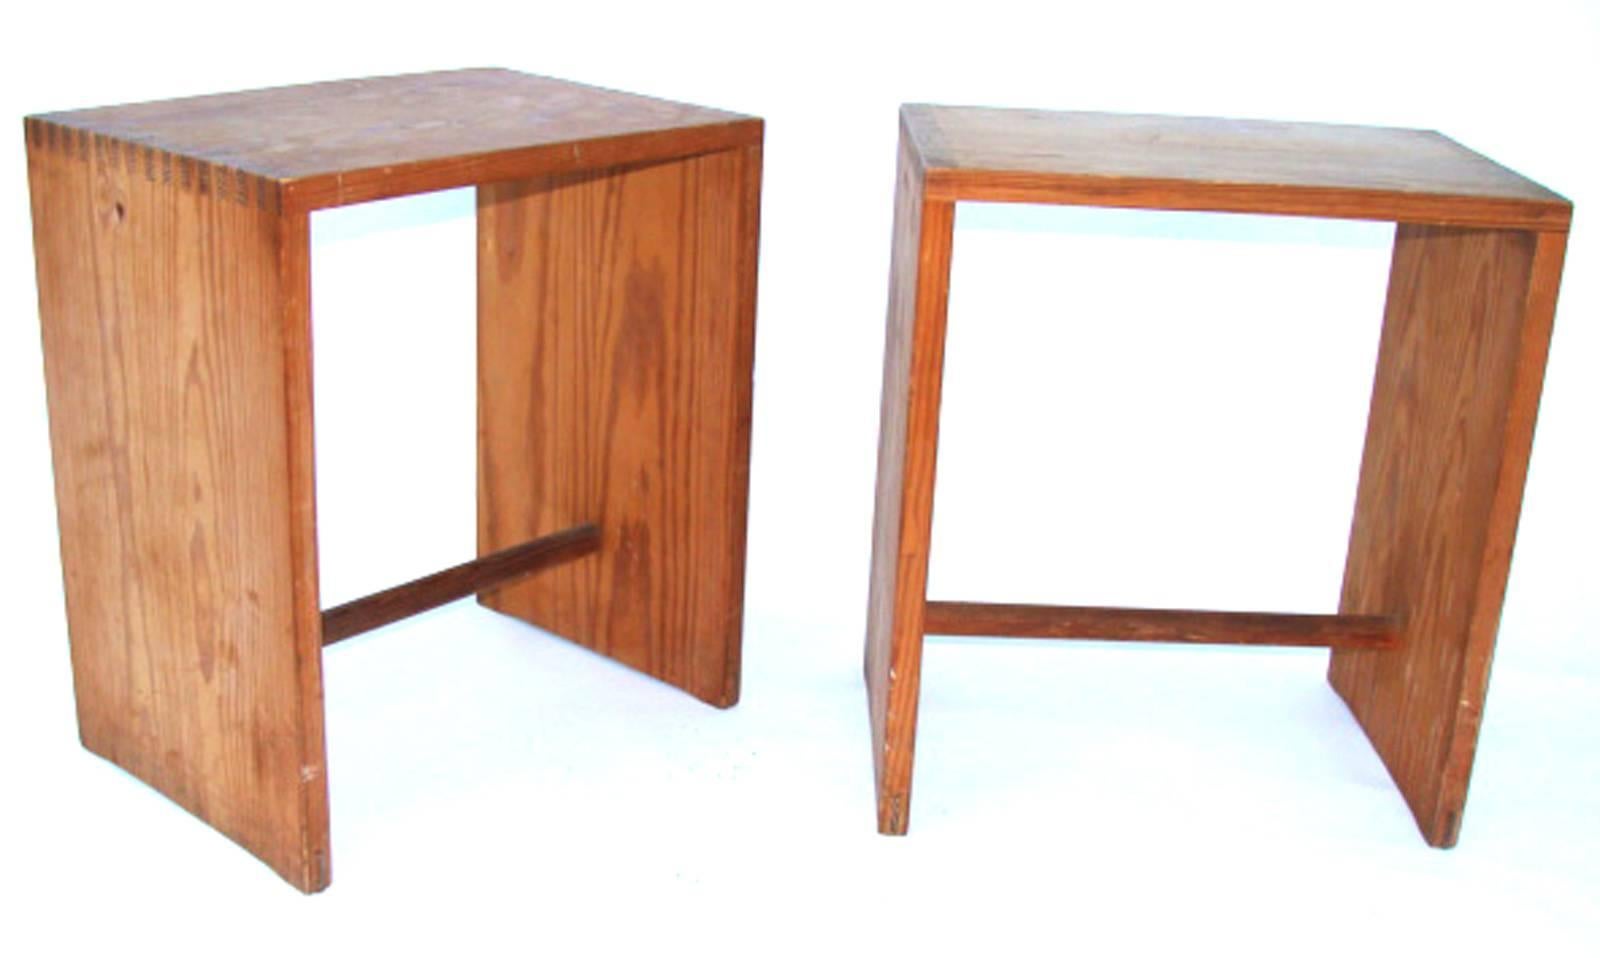 Rare matching pair of Ulm stools/side tables by Max Bill for Zanotta.
Fab original finish and signed. Minor wear with a few water stains.

Multifunctional design for use at Ulm School, Germany, circa 1954.